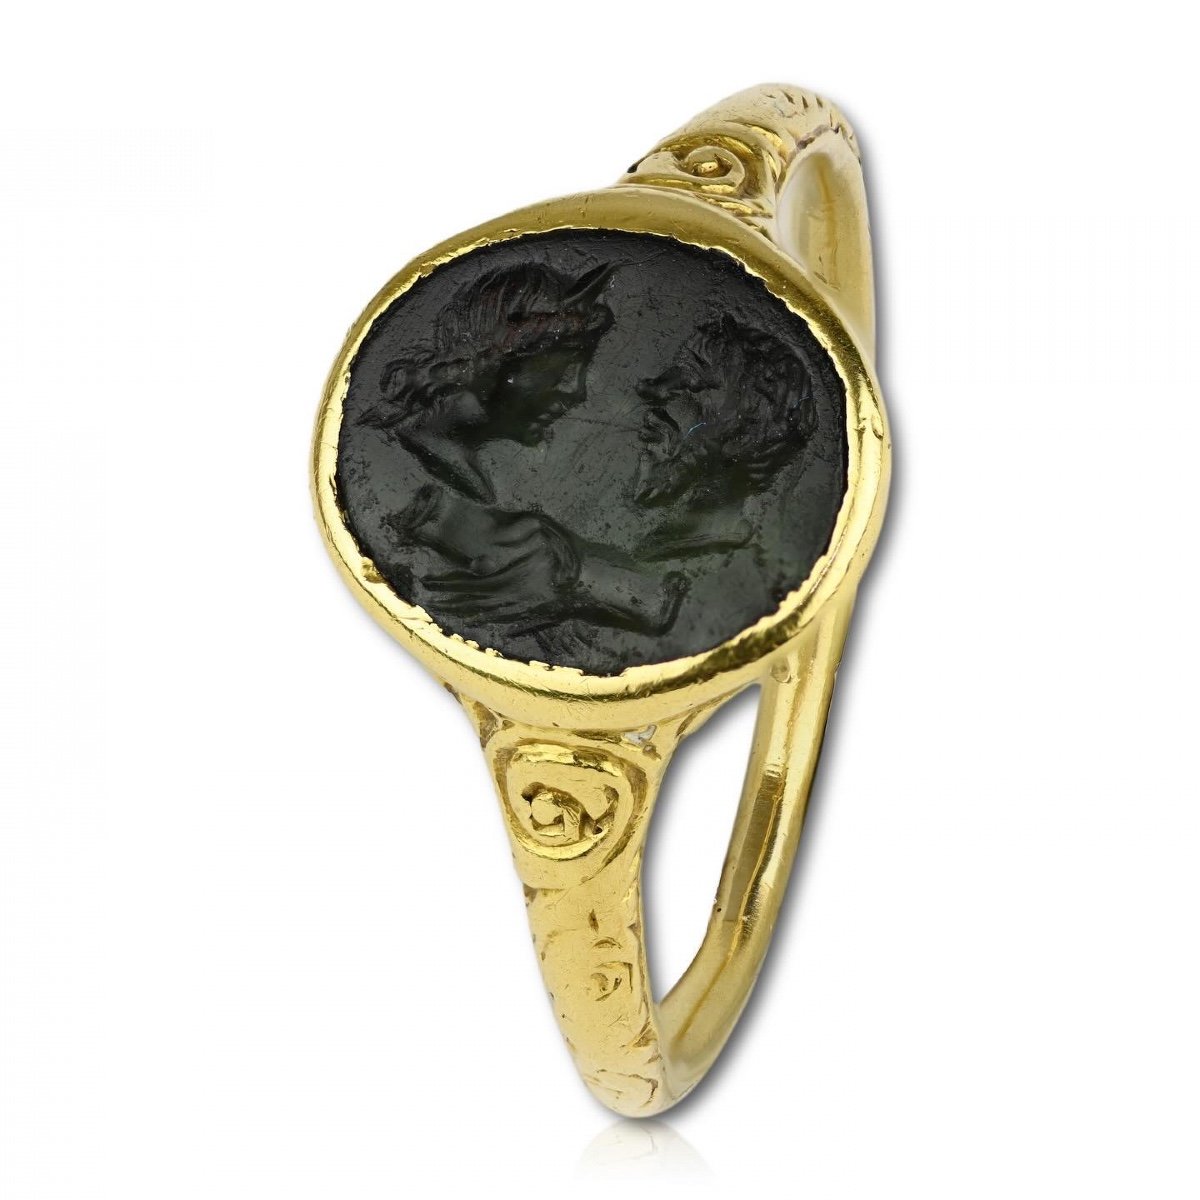 Renaissance Gold Ring With An Ancient Plasma Intaglio. German, Late 16th Century